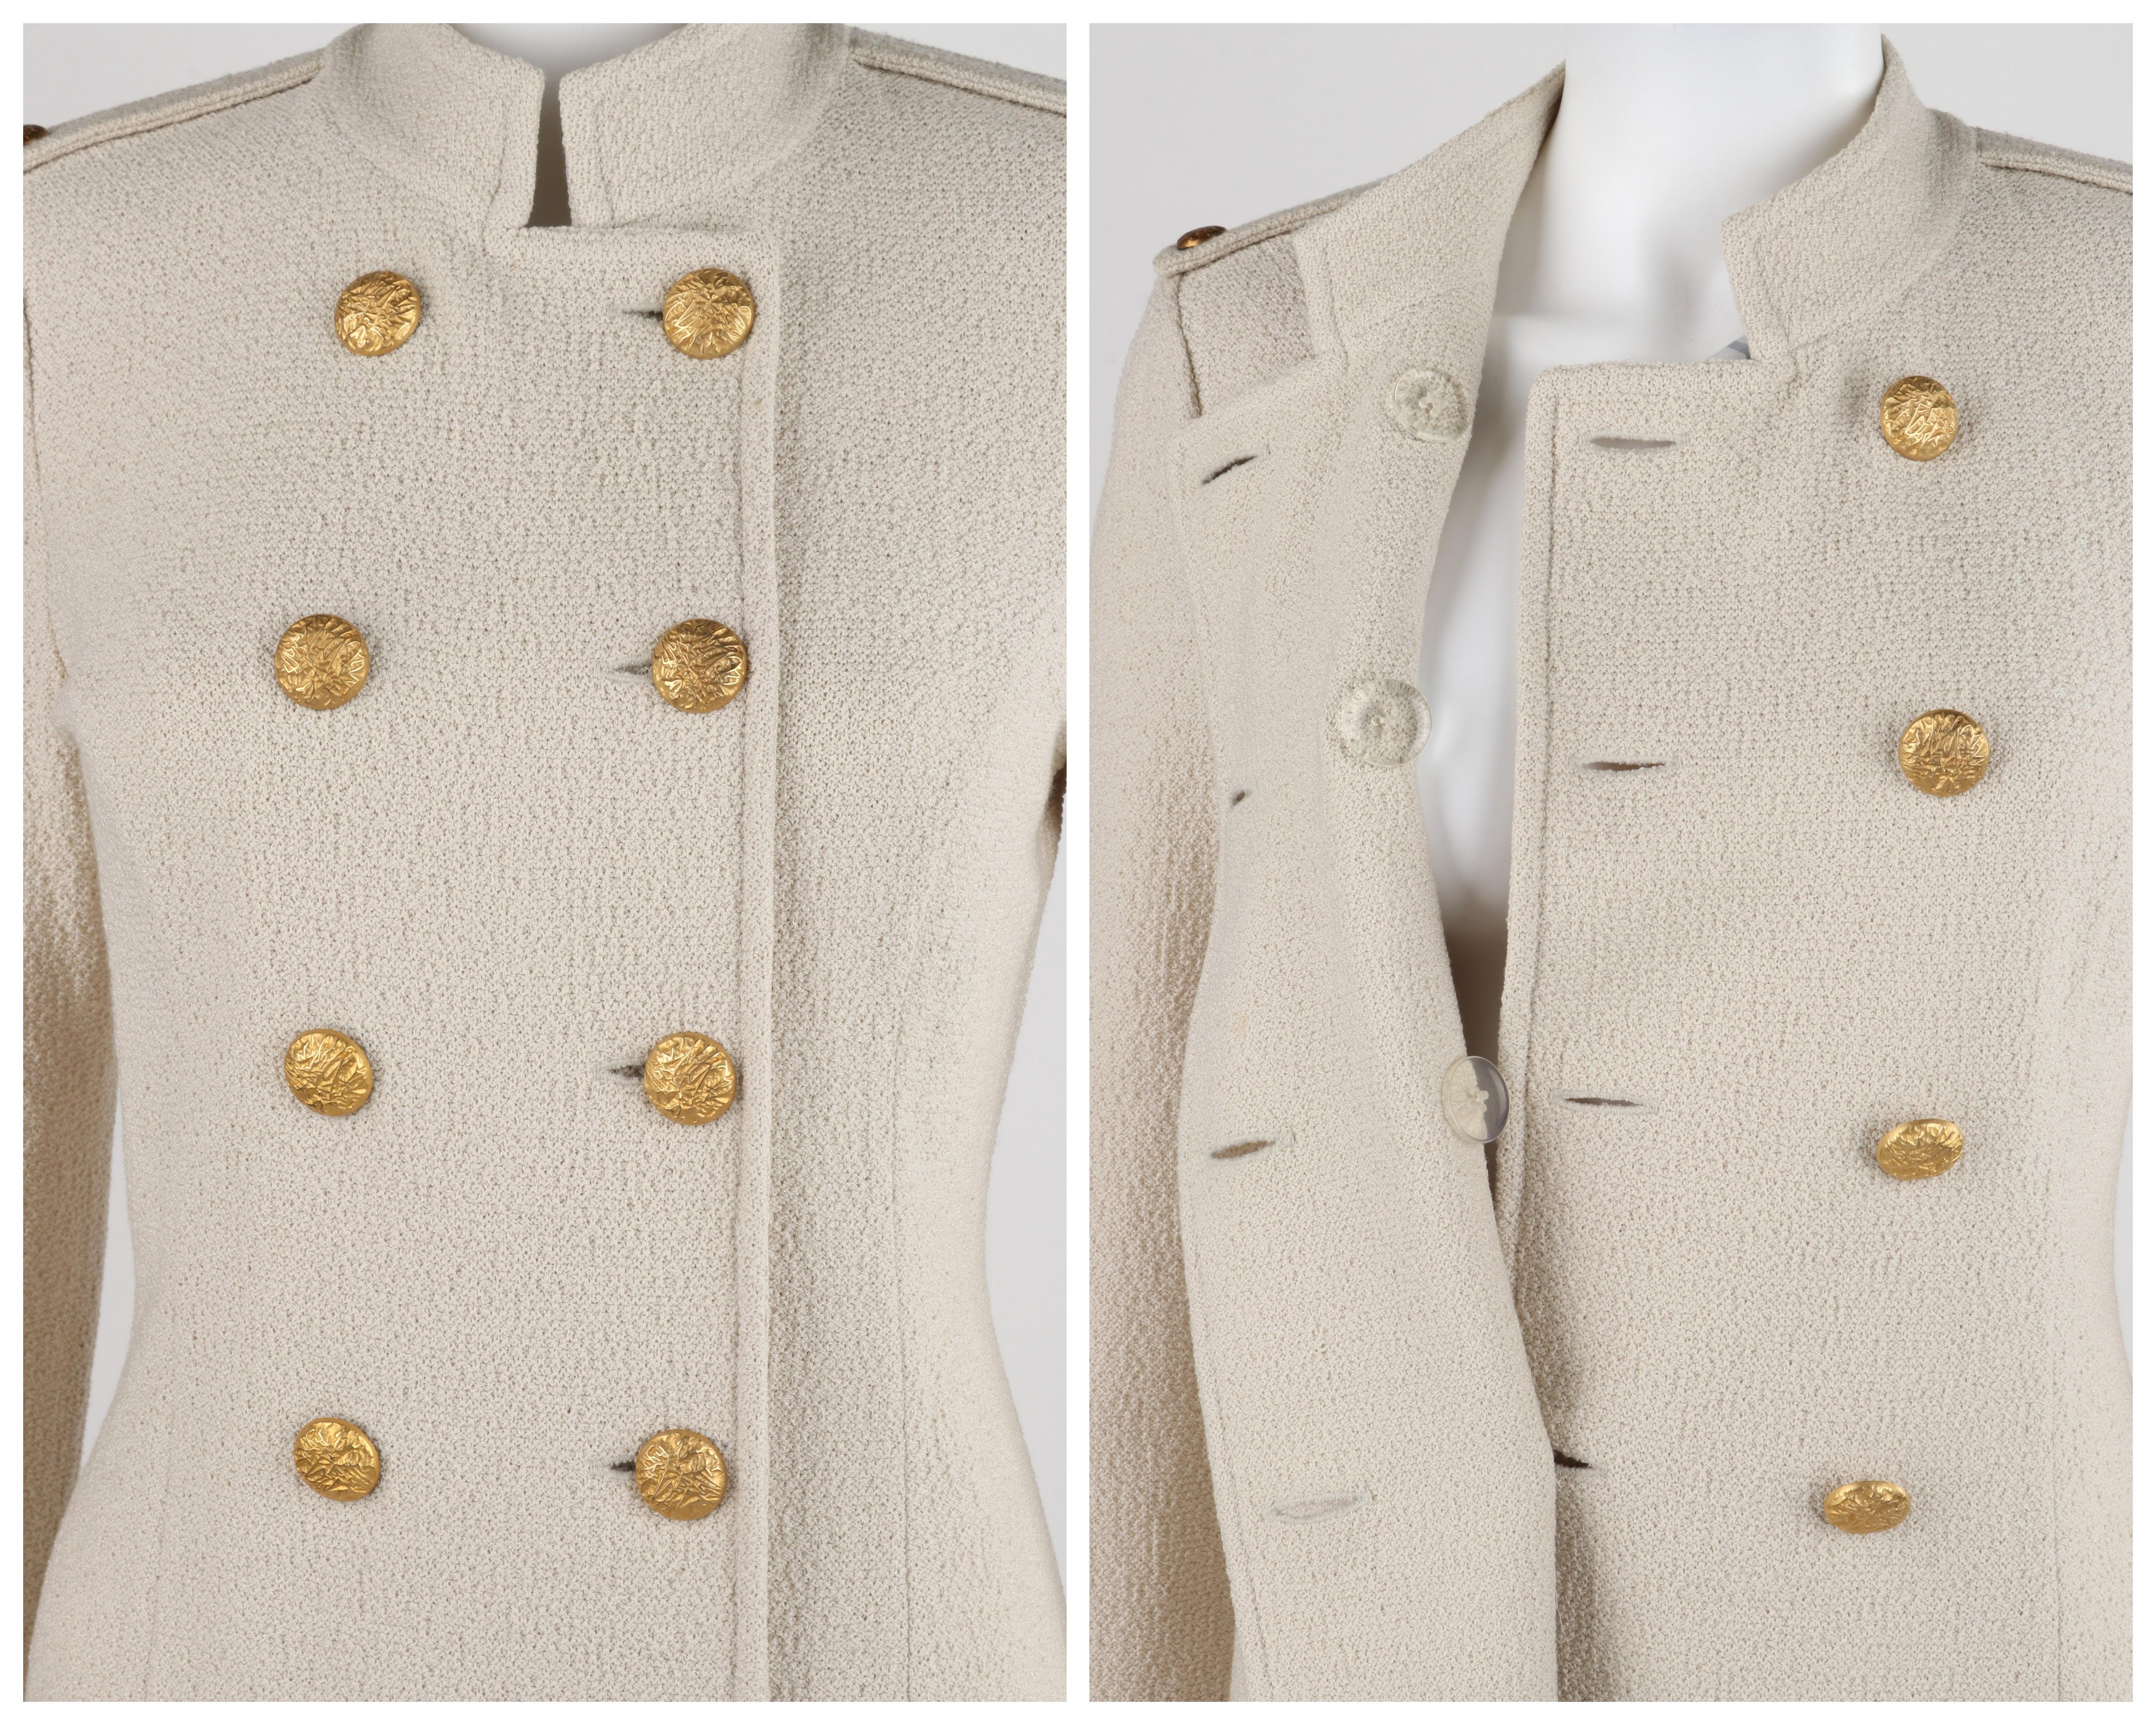 ST JOHN c.2010s Beige Knit Stand Collar Military Double-Breasted Blazer Jacket im Angebot 5